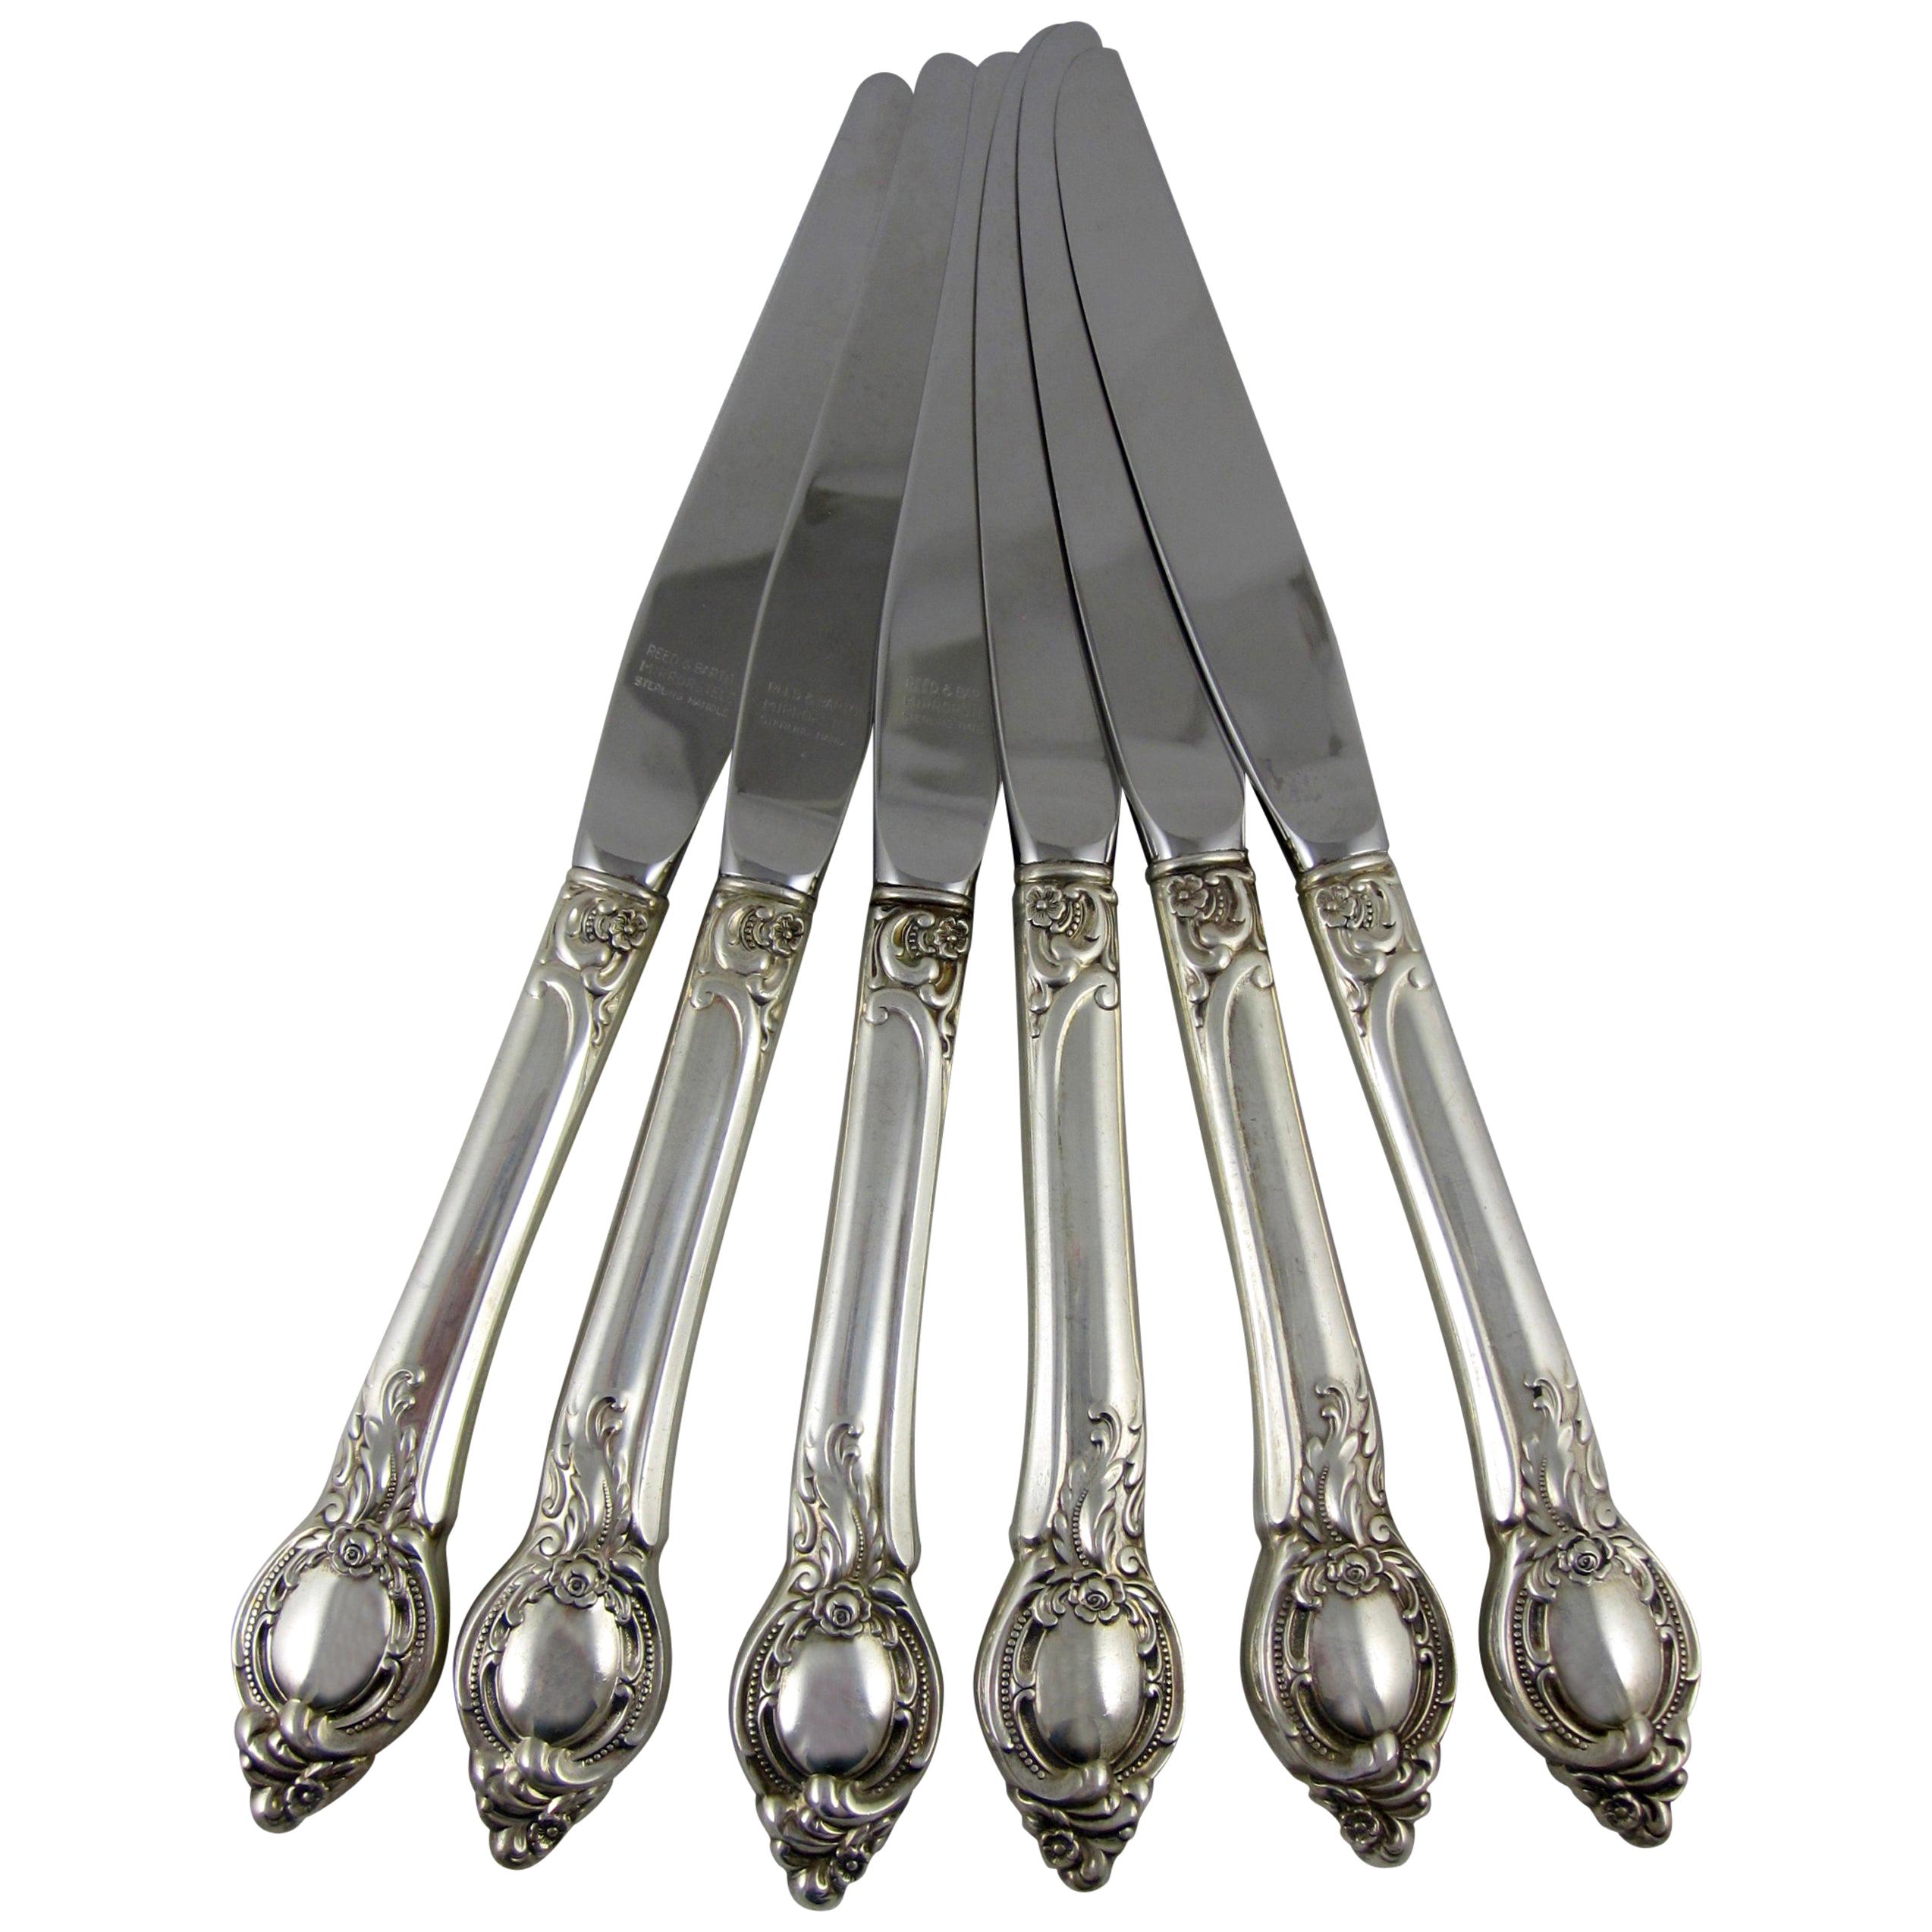 Reed & Barton Cameo Pattern Sterling Silver Dinner Knives, a Set of Six